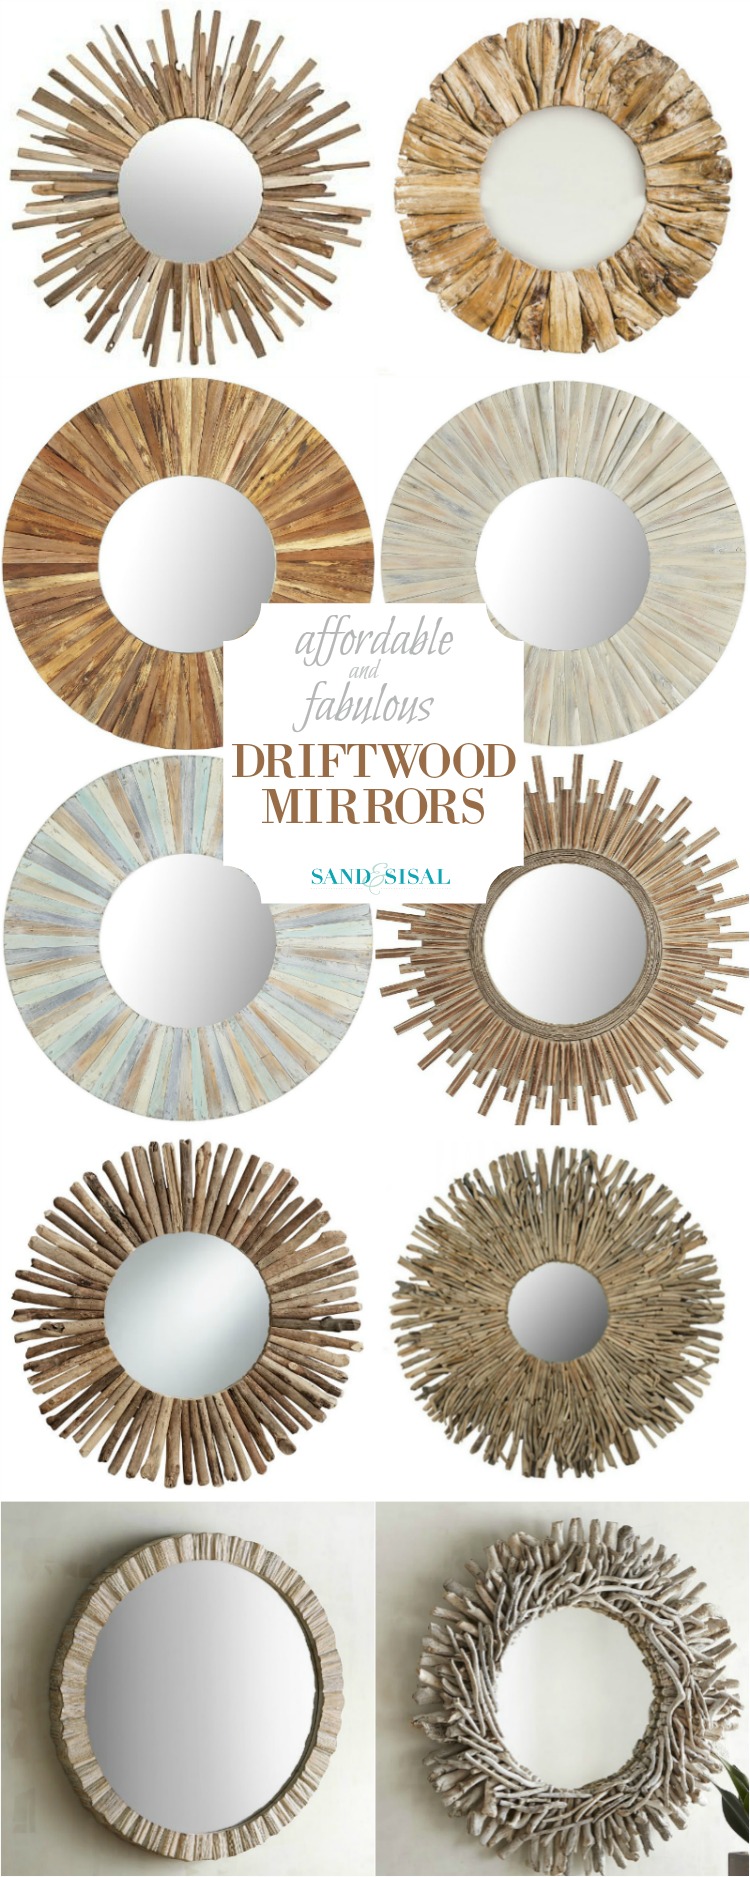 Affordable Fabulous Driftwood Mirrors